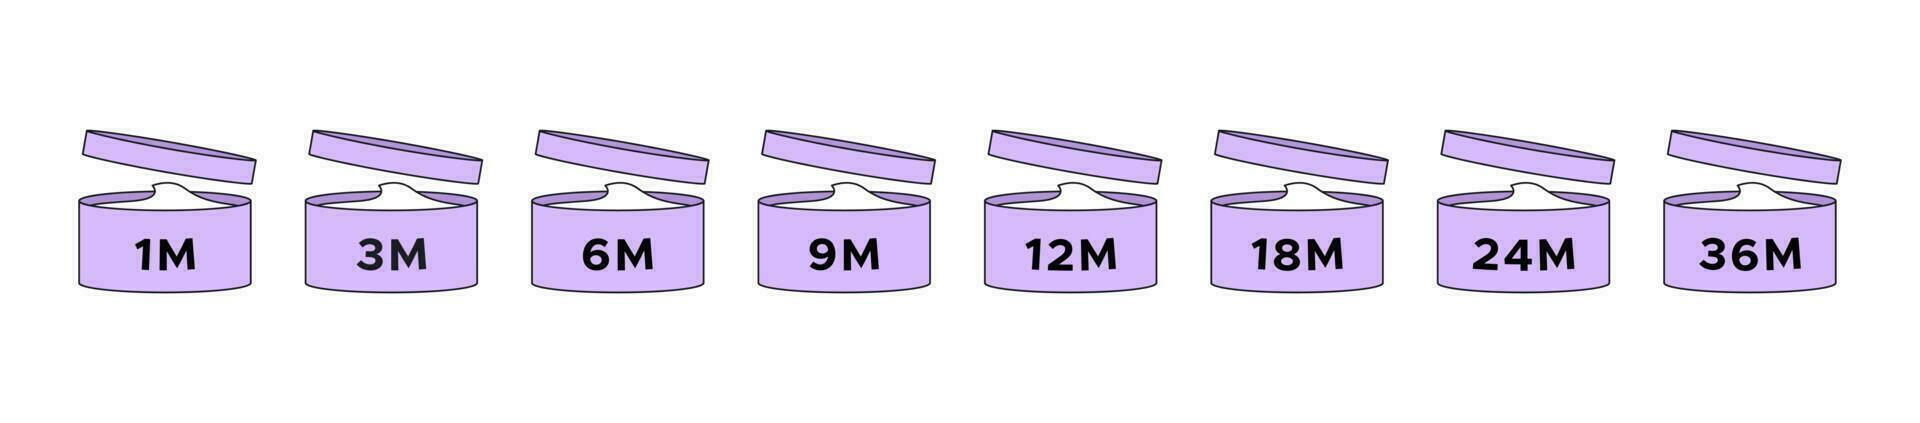 Period after opening cosmetic icon set in the cartoon style. PAO symbols - expiration of the use time for creams and cosmetics after opening the package. Purple cute vector illustration for beauty.